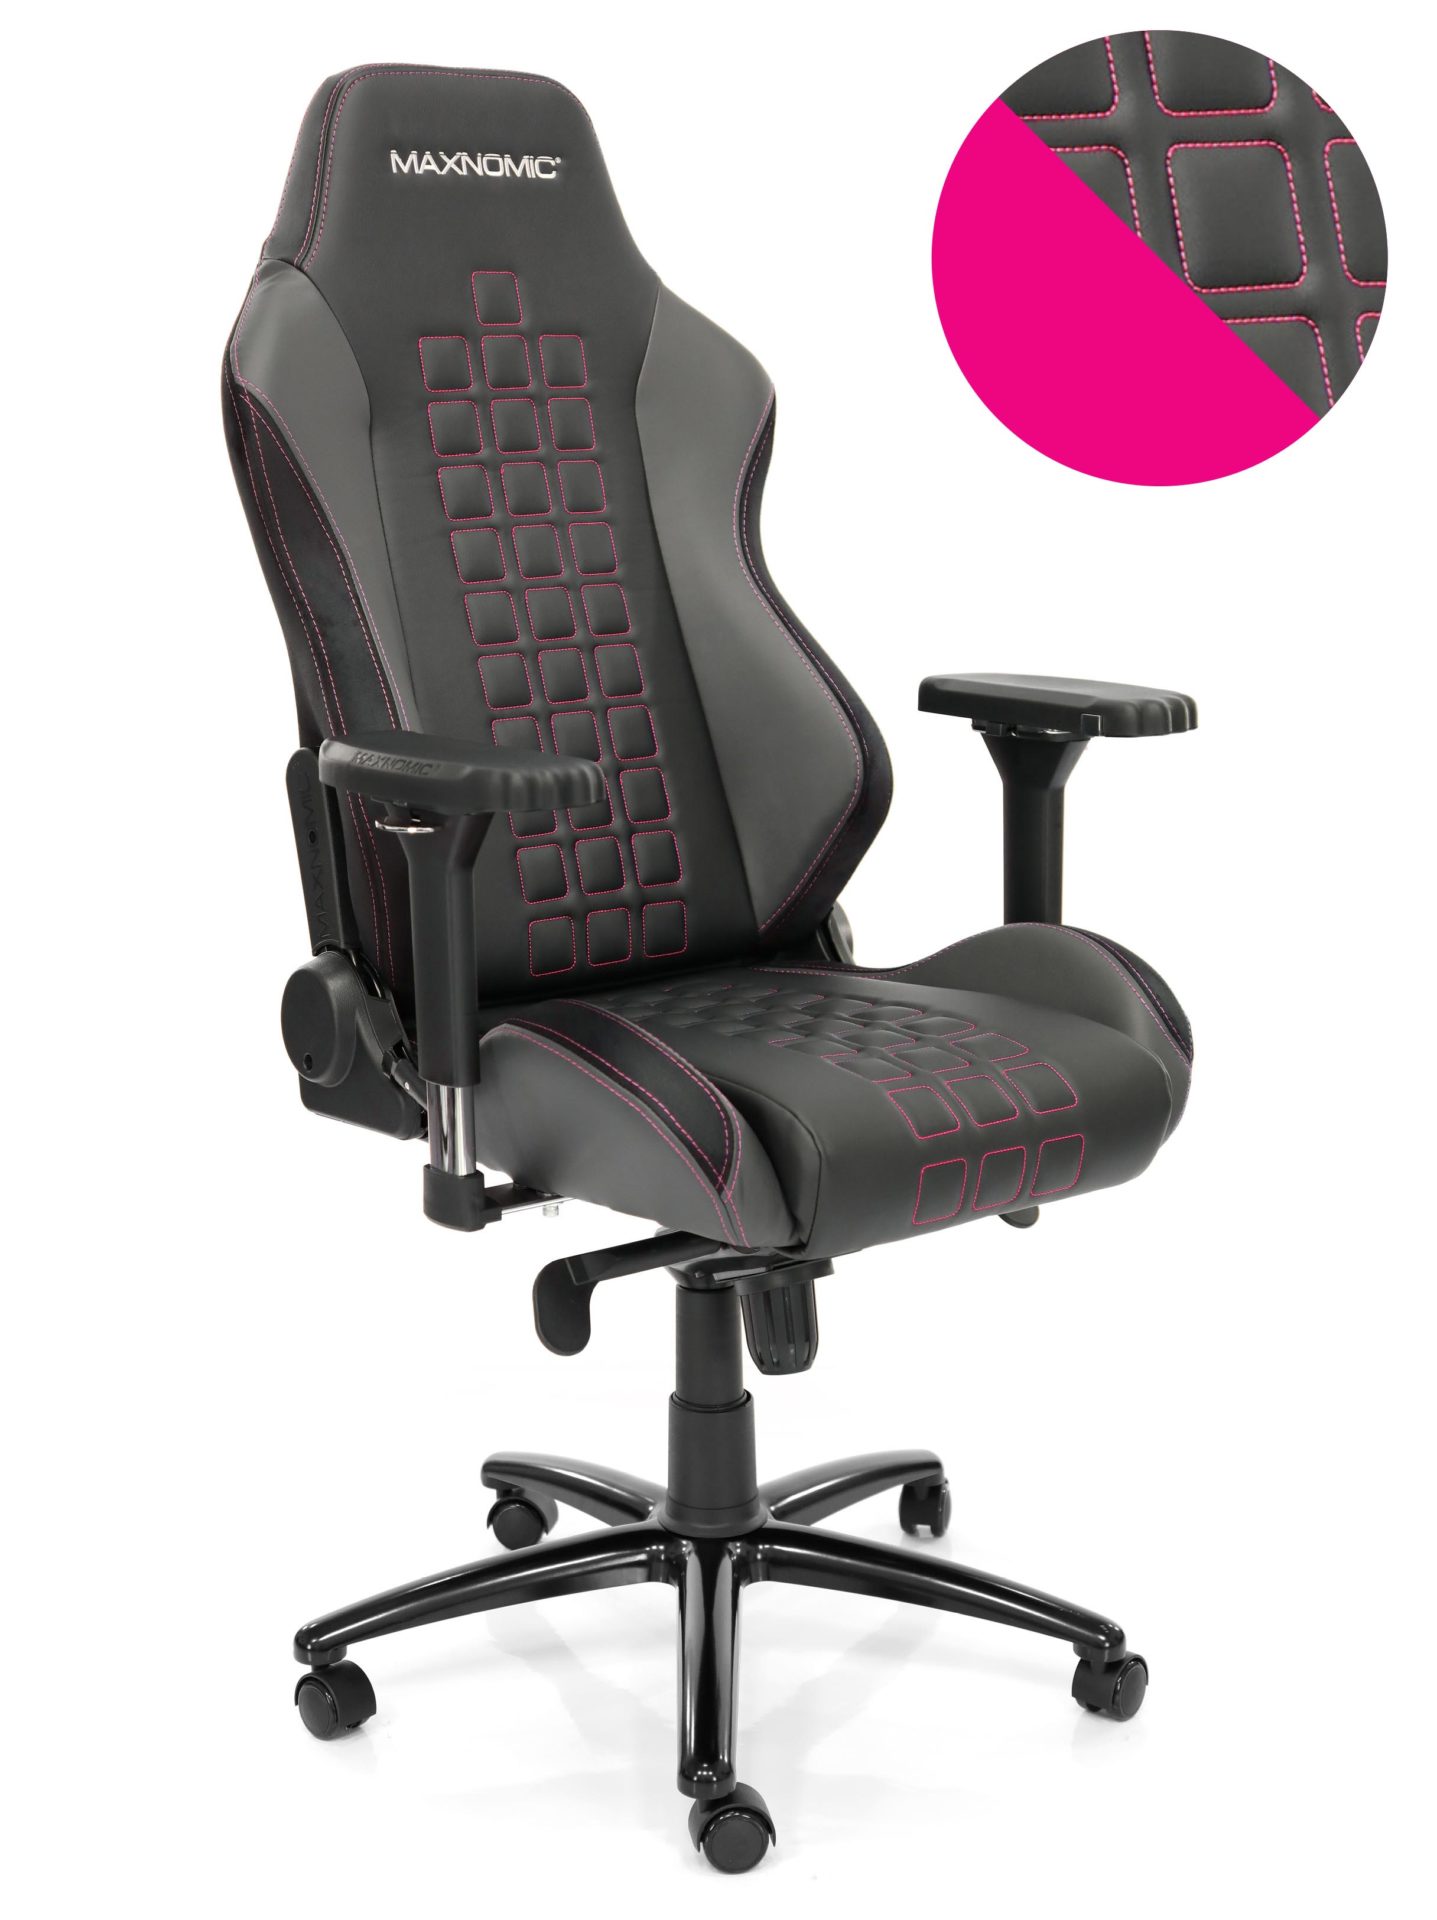 eSports chair model QUADCEPTOR Pro from Maxnomic® in Rasberry Red. A black office chair with square stitching, red seams and design-protected Maxnomic® 4D armrests.